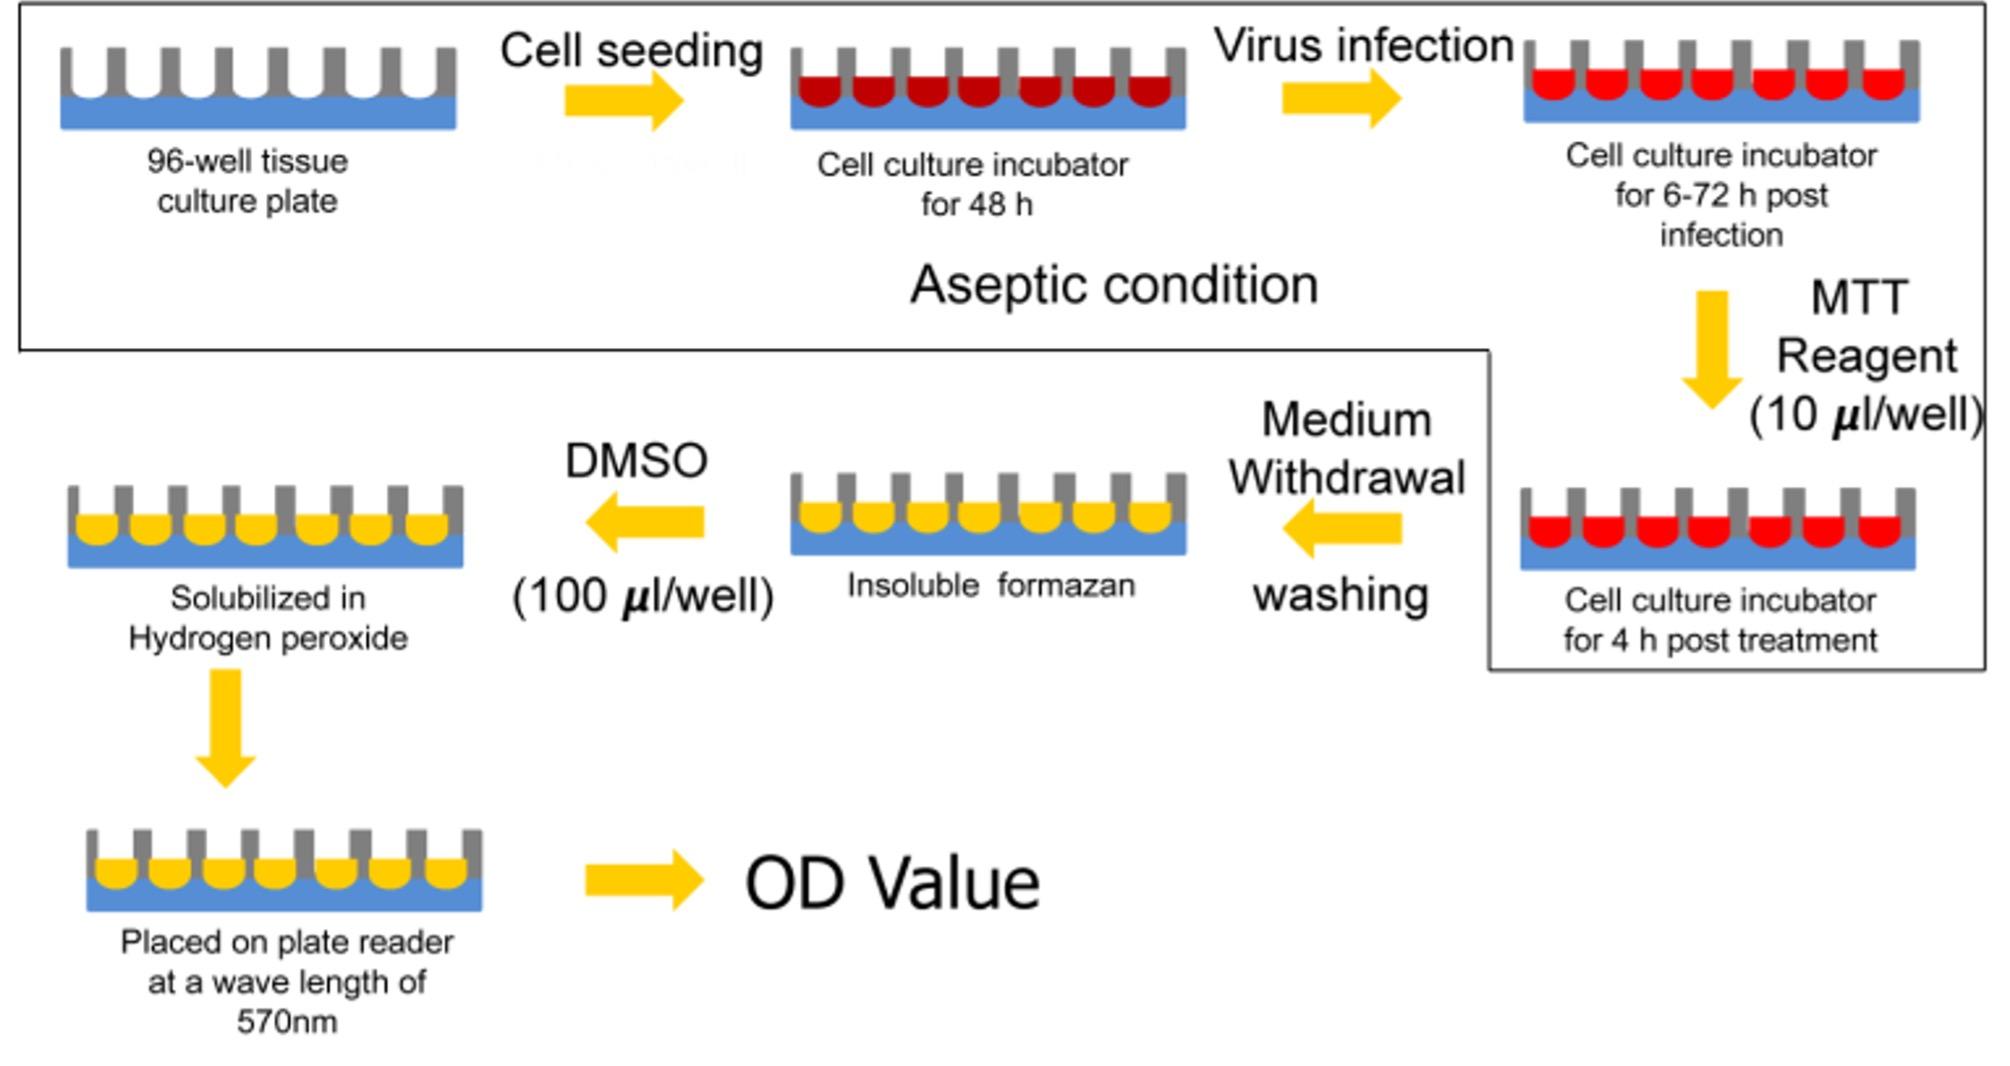 Spectrochemical characterization of Vero cell line against PPR virus infection